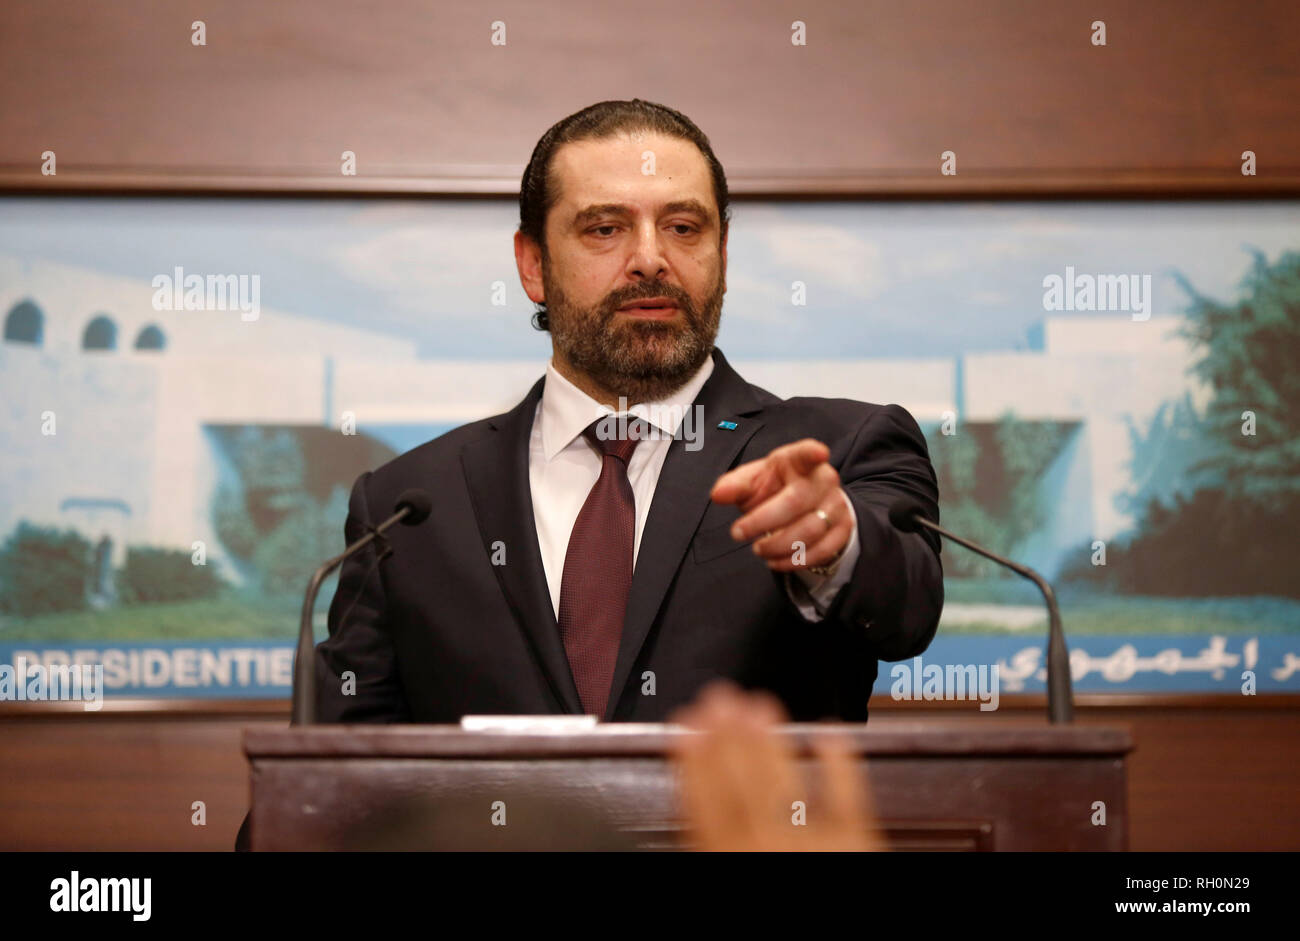 Beirut, Lebanon. 31st Jan, 2019. Lebanese Prime Minister Saad Hariri attends a press conference in Beirut, Lebanon, Jan. 31, 2019. Lebanon announced Thursday the formation of a new government, which is headed by Prime Minister Saad Hariri, breaking a nine-month political deadlock in the country, local TV Channel LBCI reported. Credit: Bilal Jawich/Xinhua/Alamy Live News Stock Photo